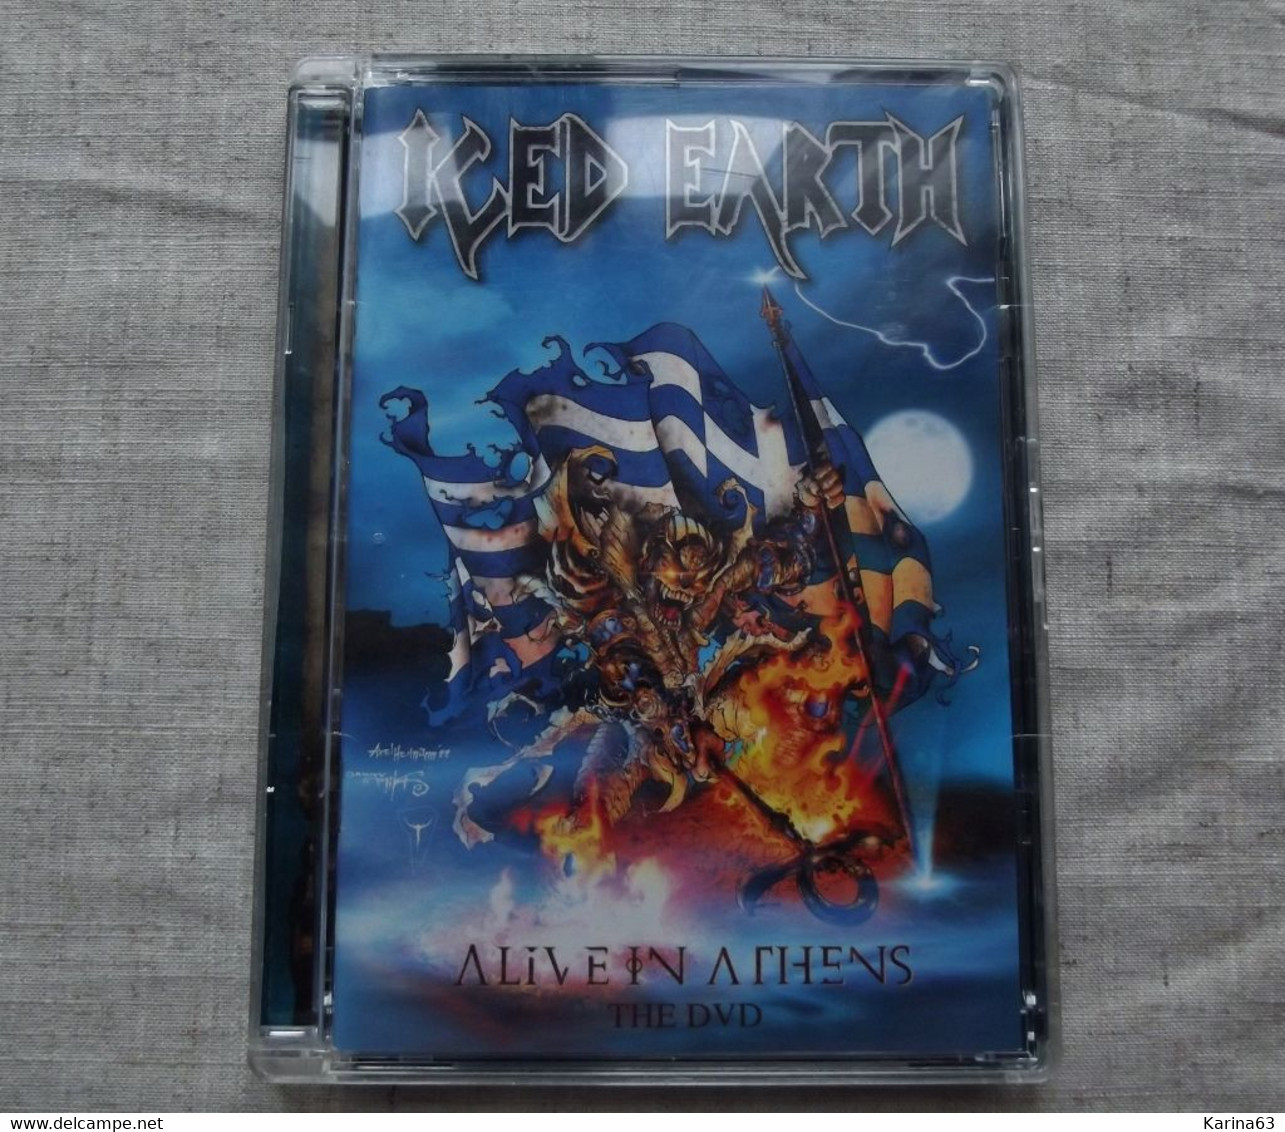 Iced Earth - Alive In Athens - 2007 - Musik-DVD's